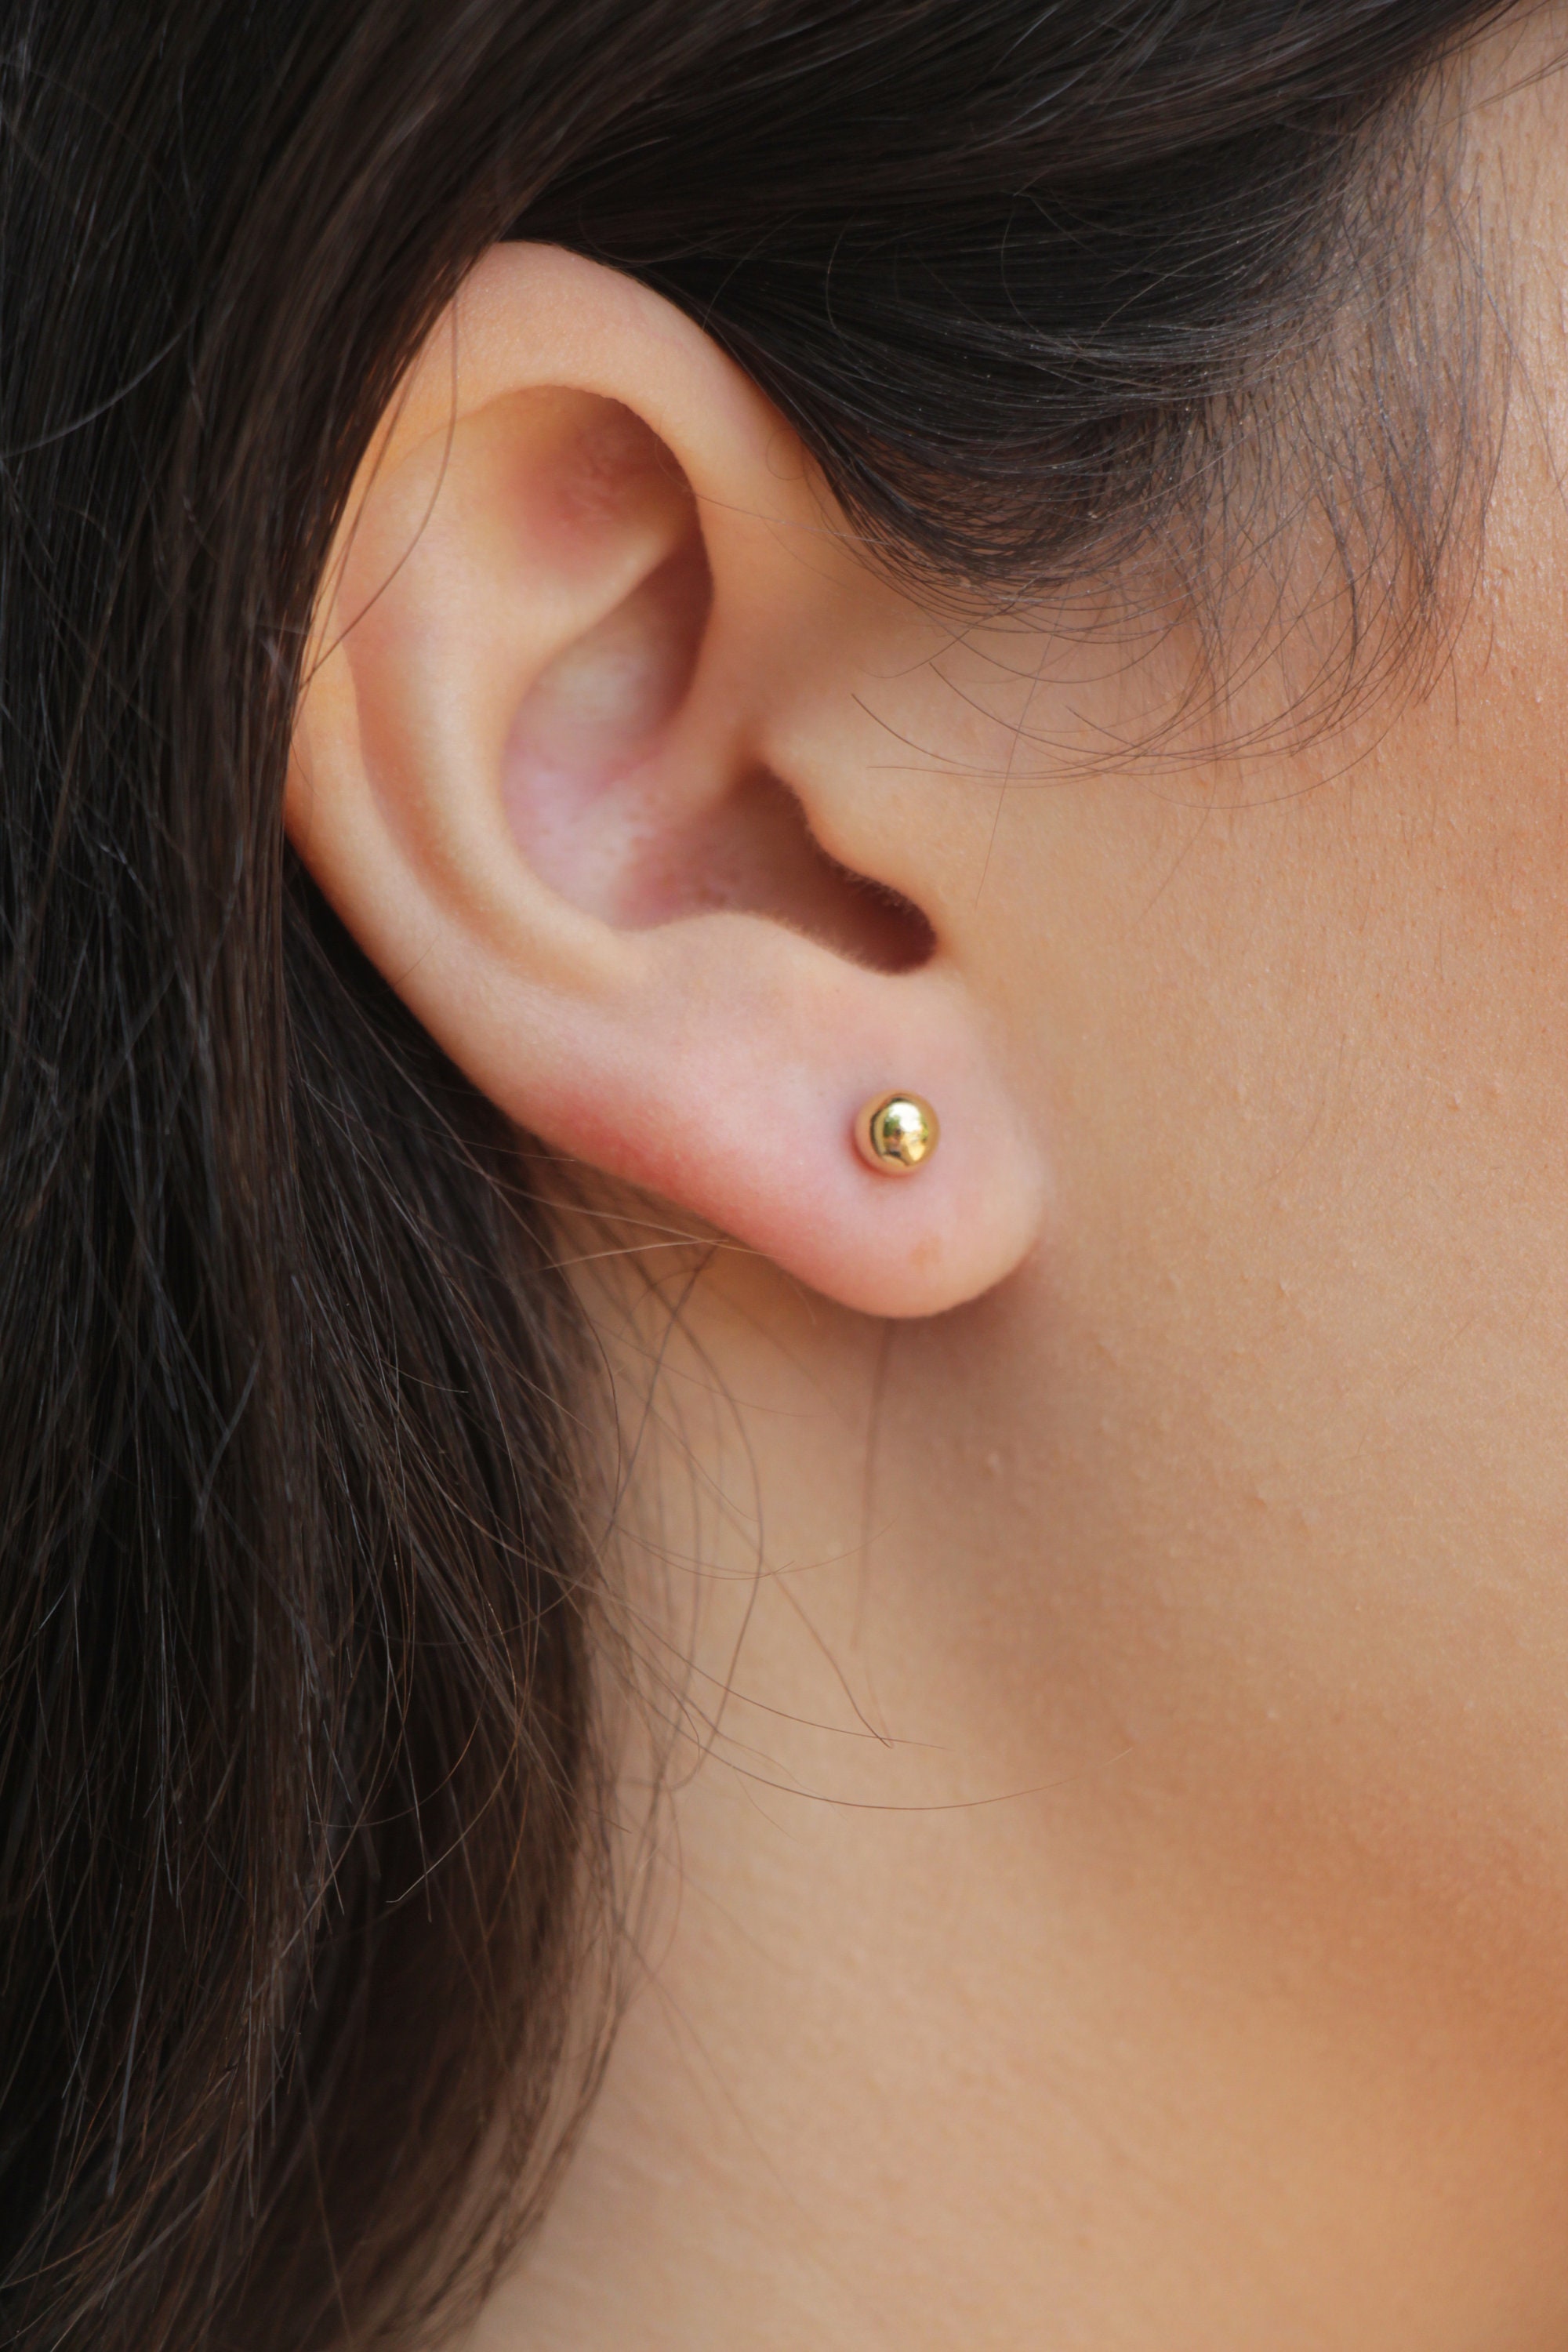 Buy 5mm Trinity Ball Stud Earrings in 14k Solid Gold , Tiny 3 Gold Ball  Stud Earrings, Triple Dot Tragus Small Cartilage Conch Lobe Helix Pin  Online in India - Etsy